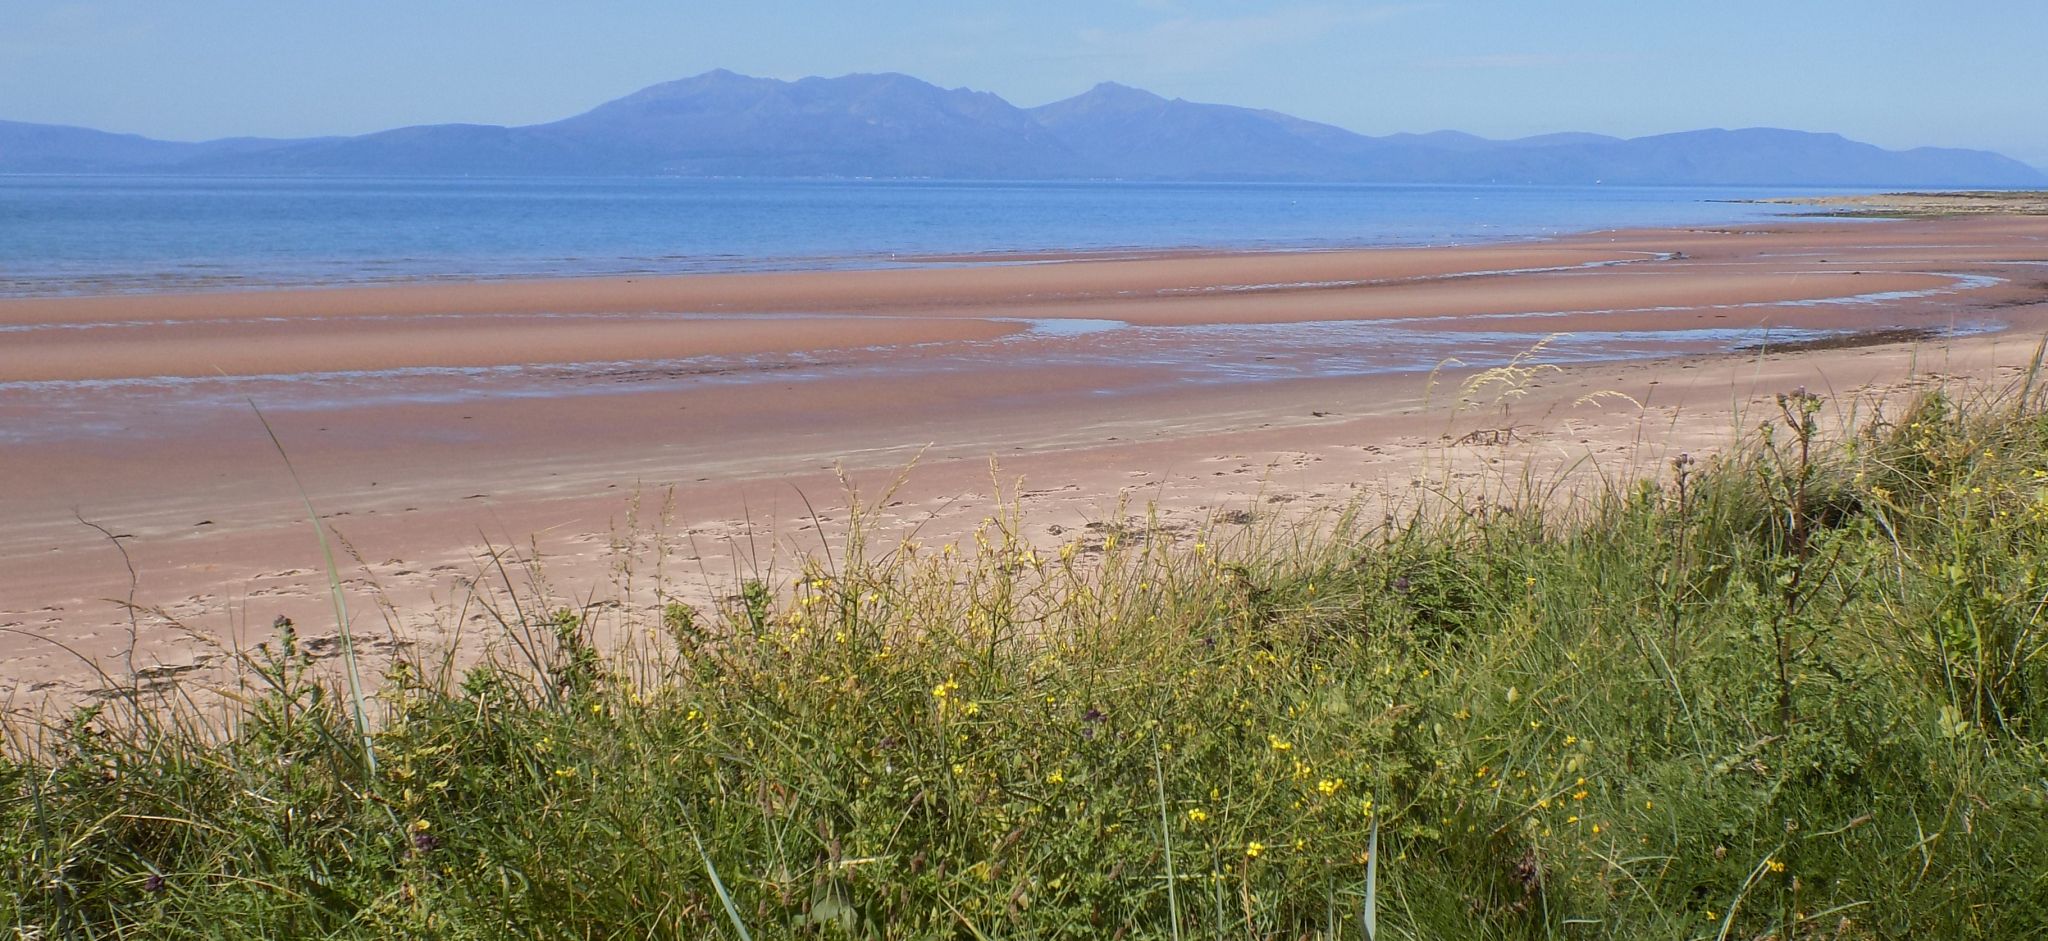 View across the Firth of Clyde to the Isle of Arran